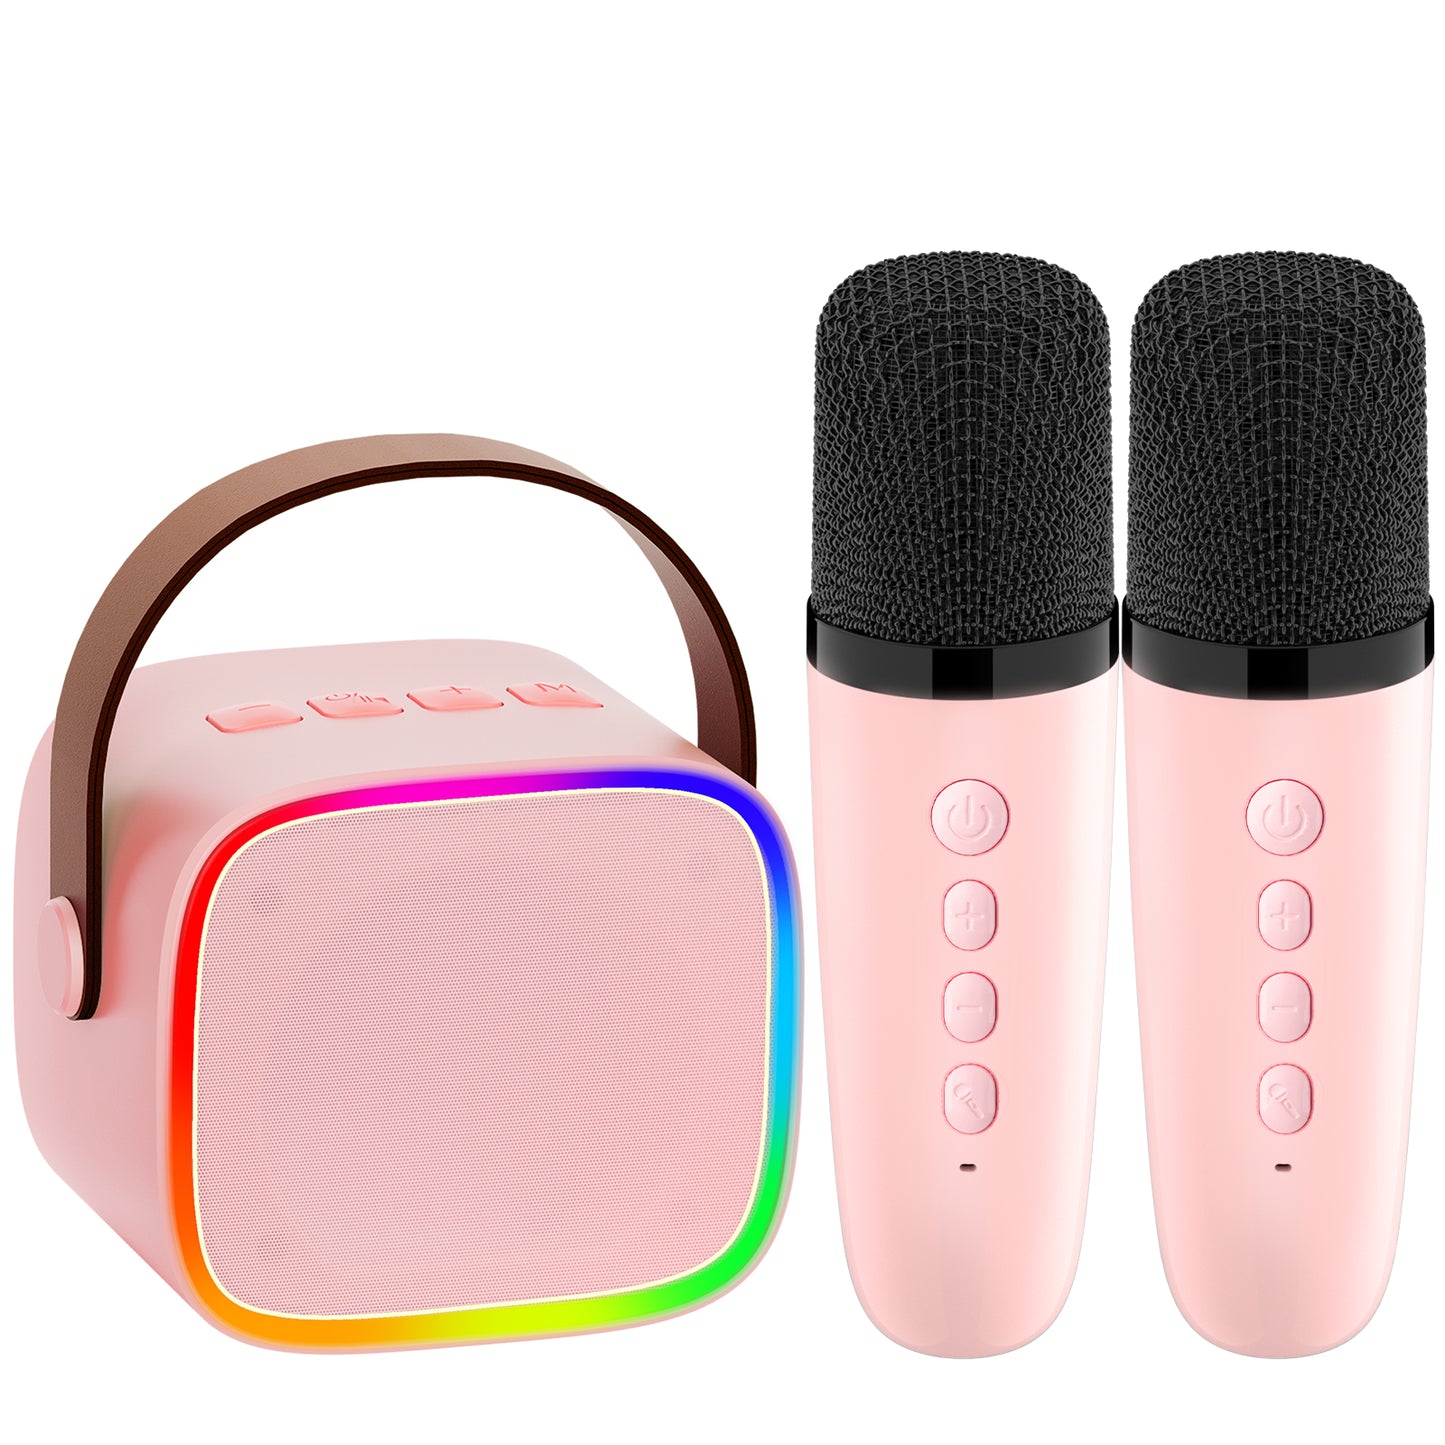 Kids Karaoke Machine Toy Set,BONAOK Portable Mini Bluetooth Speaker with Wireless Microphone Christmas Girls Boys Birthday Gifts for Years Old 4, 5, 6, 7+ Tablets & Accessories 2MIC P-ink